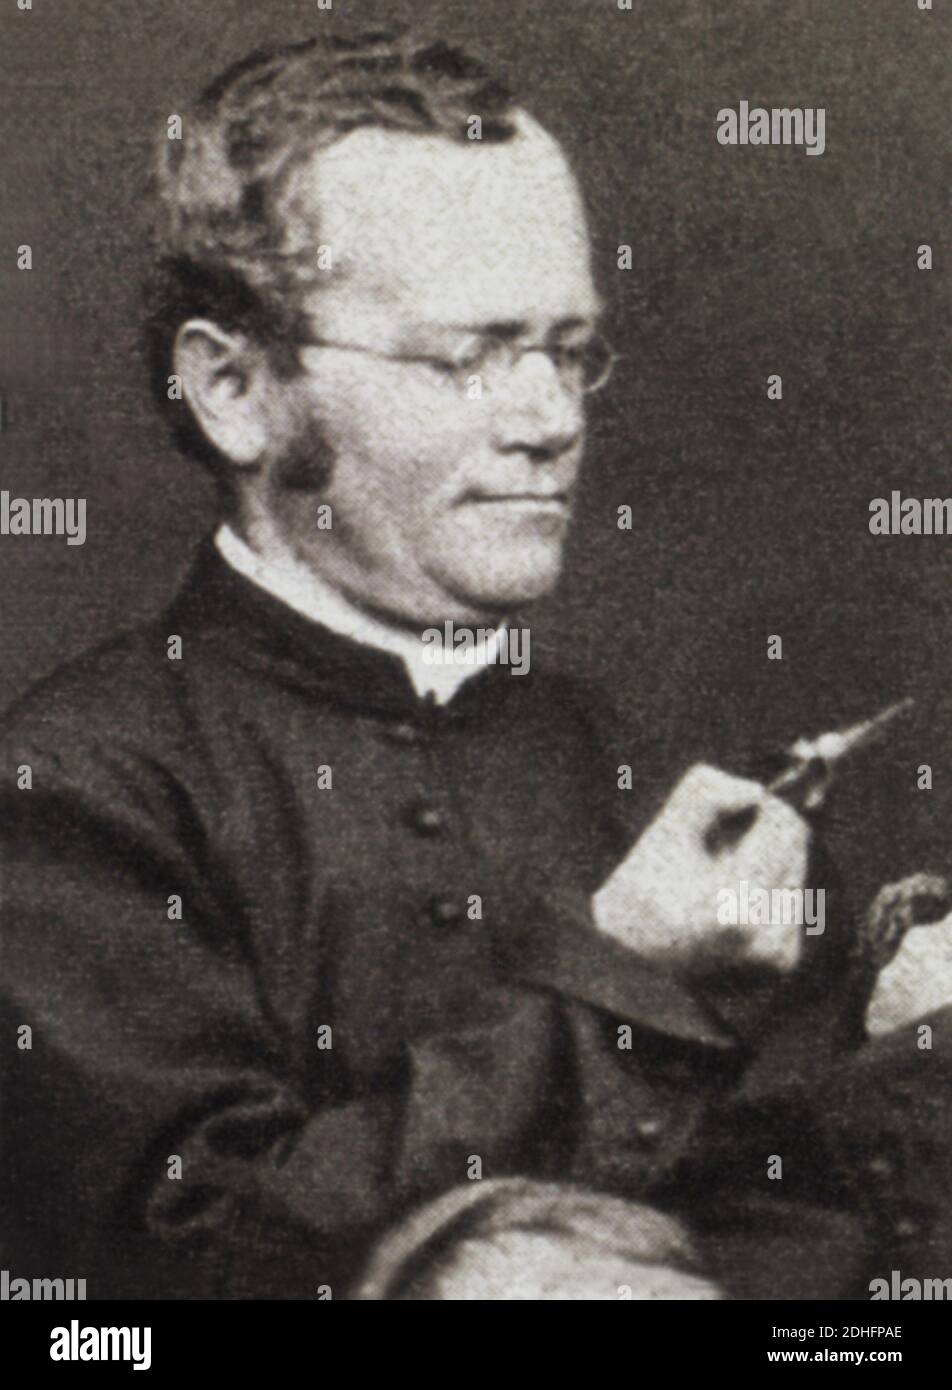 The bohemian scientist biologist GREGOR Johann MENDEL ( 1822 - 1884 ) , agostinian monch , founder of GENETICS with his research on green peas colture  for the THEORY OF EREDITY  - GENE - GENETICA -  BIOLOGIA -  BIOLOGY - ereditarietà - portrait - ritratto - monaco agostiniano - genetic - dominanza - disgiunzione - indipendenza ----   Archivio GBB Stock Photo